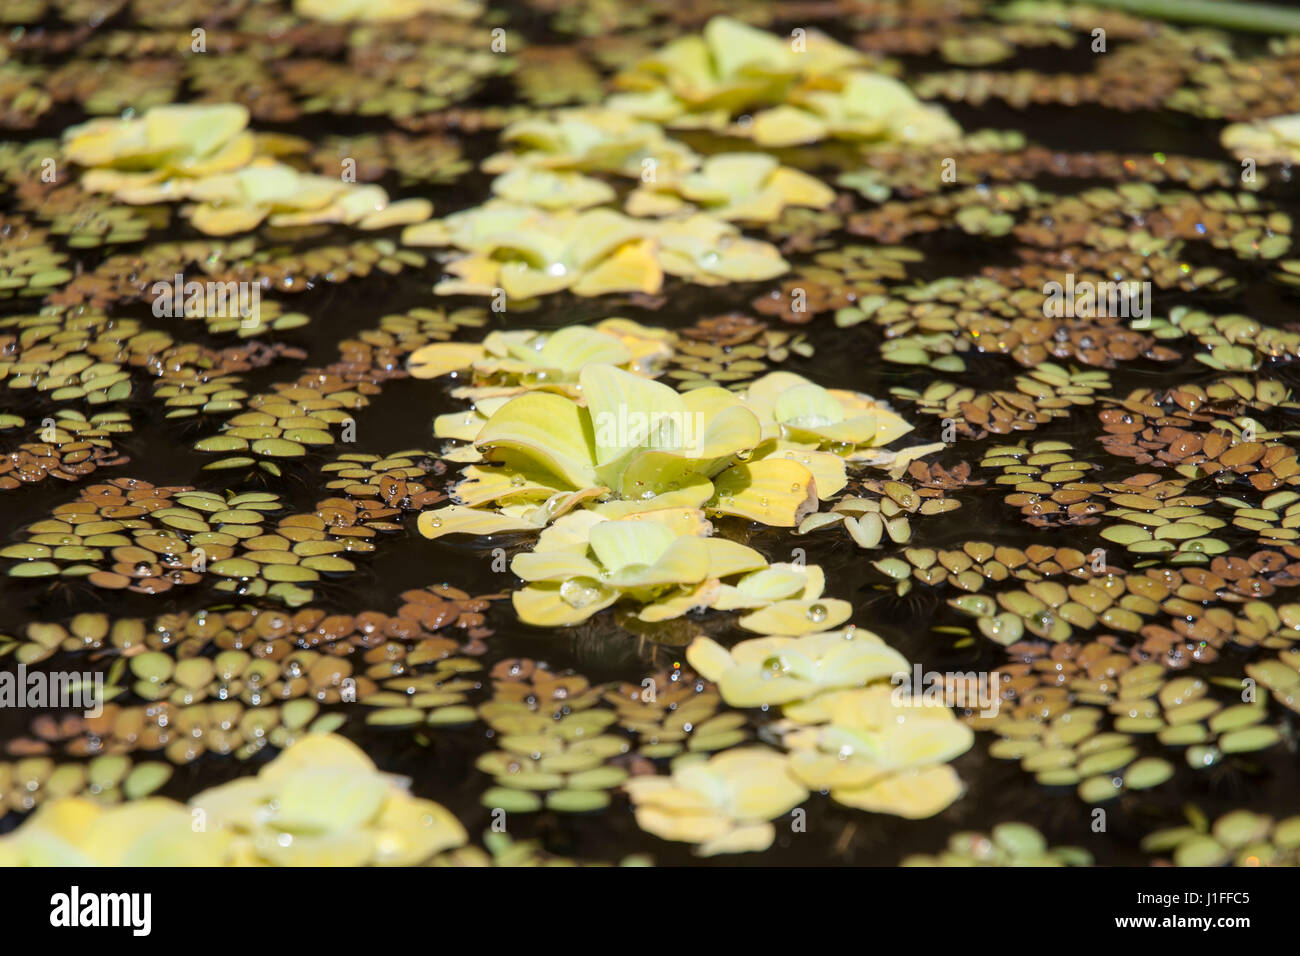 Yellowish water lettuce or water cabagge (Pistia stratiotes) floating in a pond Stock Photo